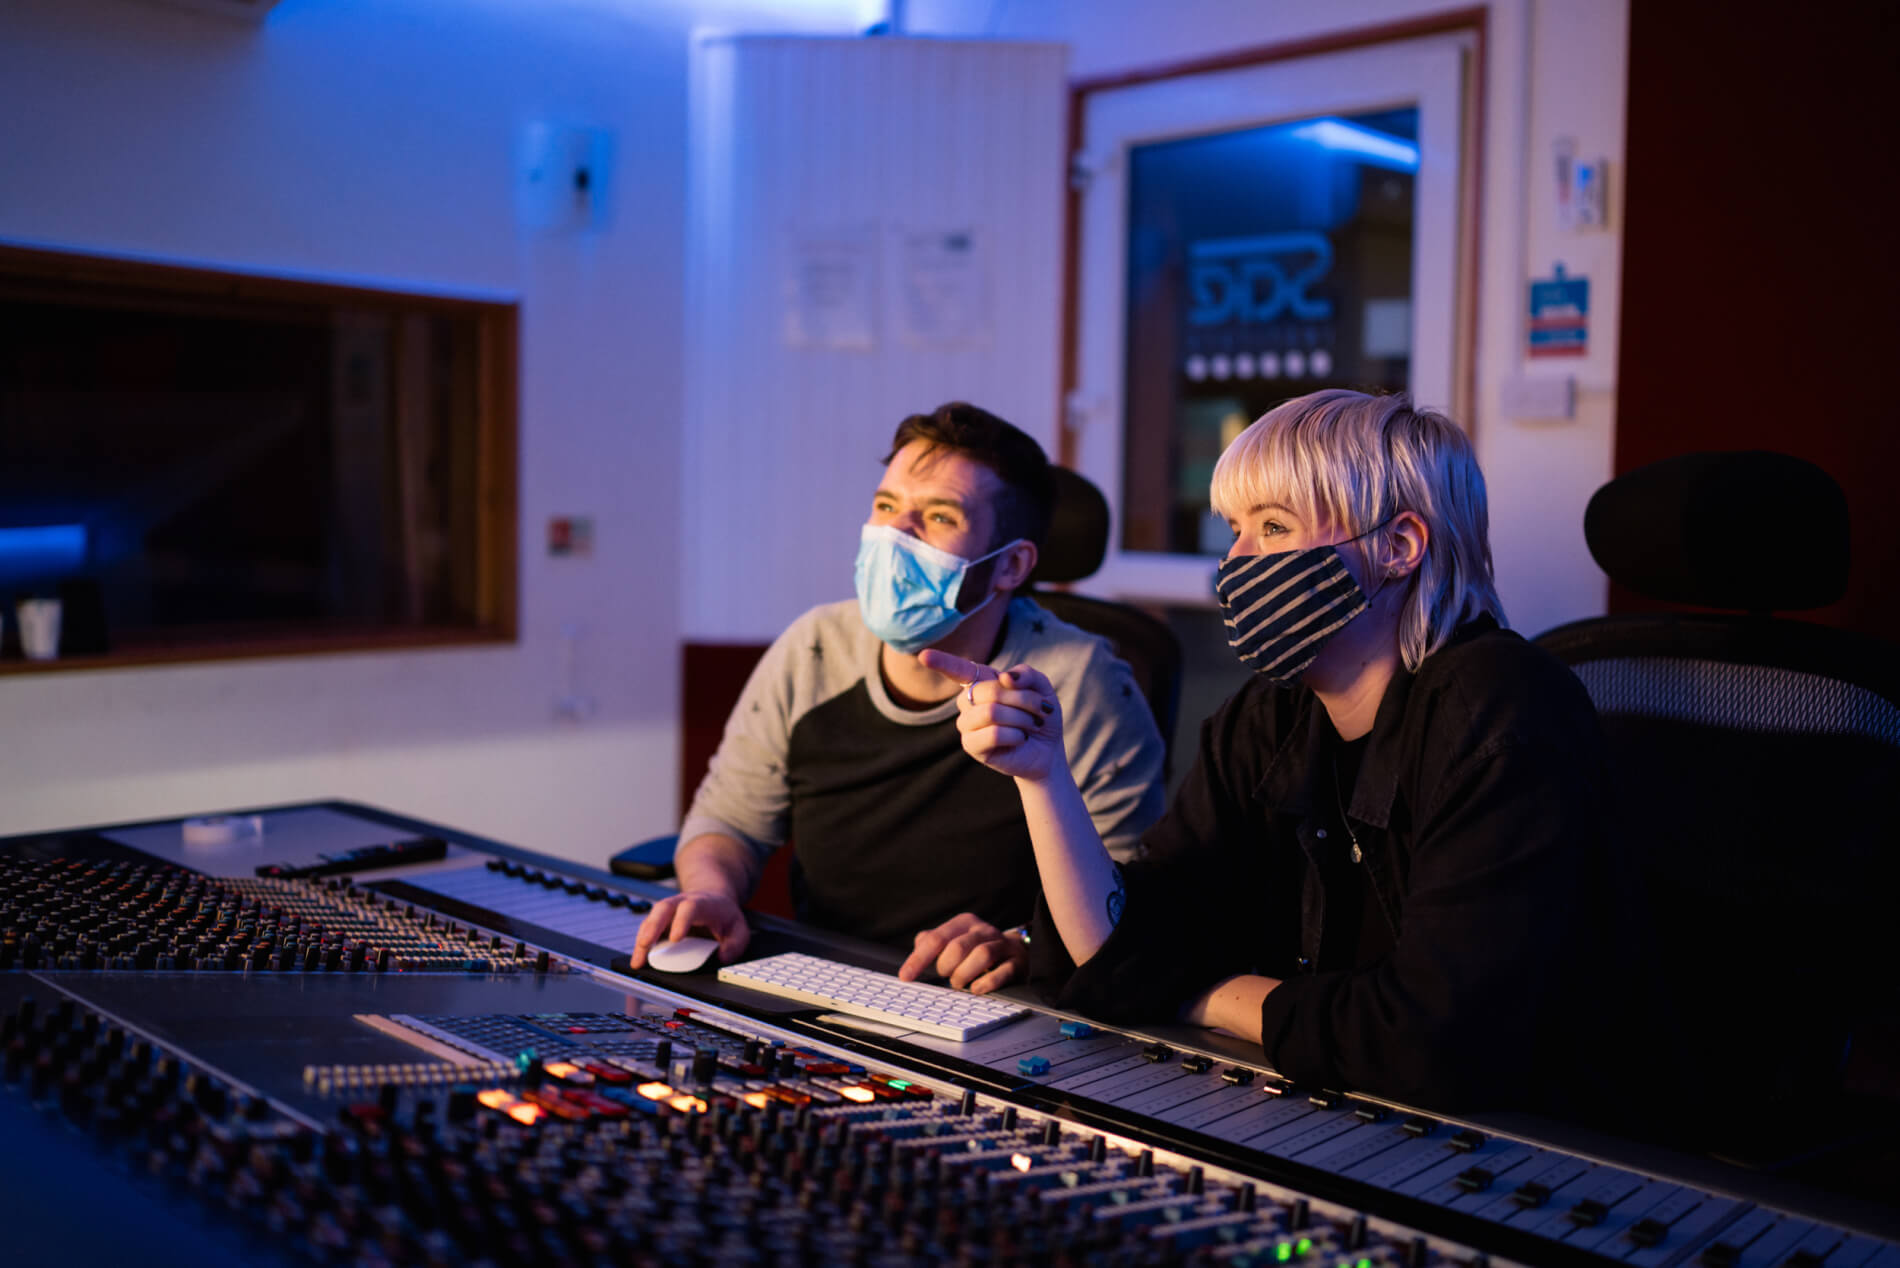 Two music students wearing face masks sit in an audio studio. One is moving a mouse and using a keyboard. The other is pointing off camera.